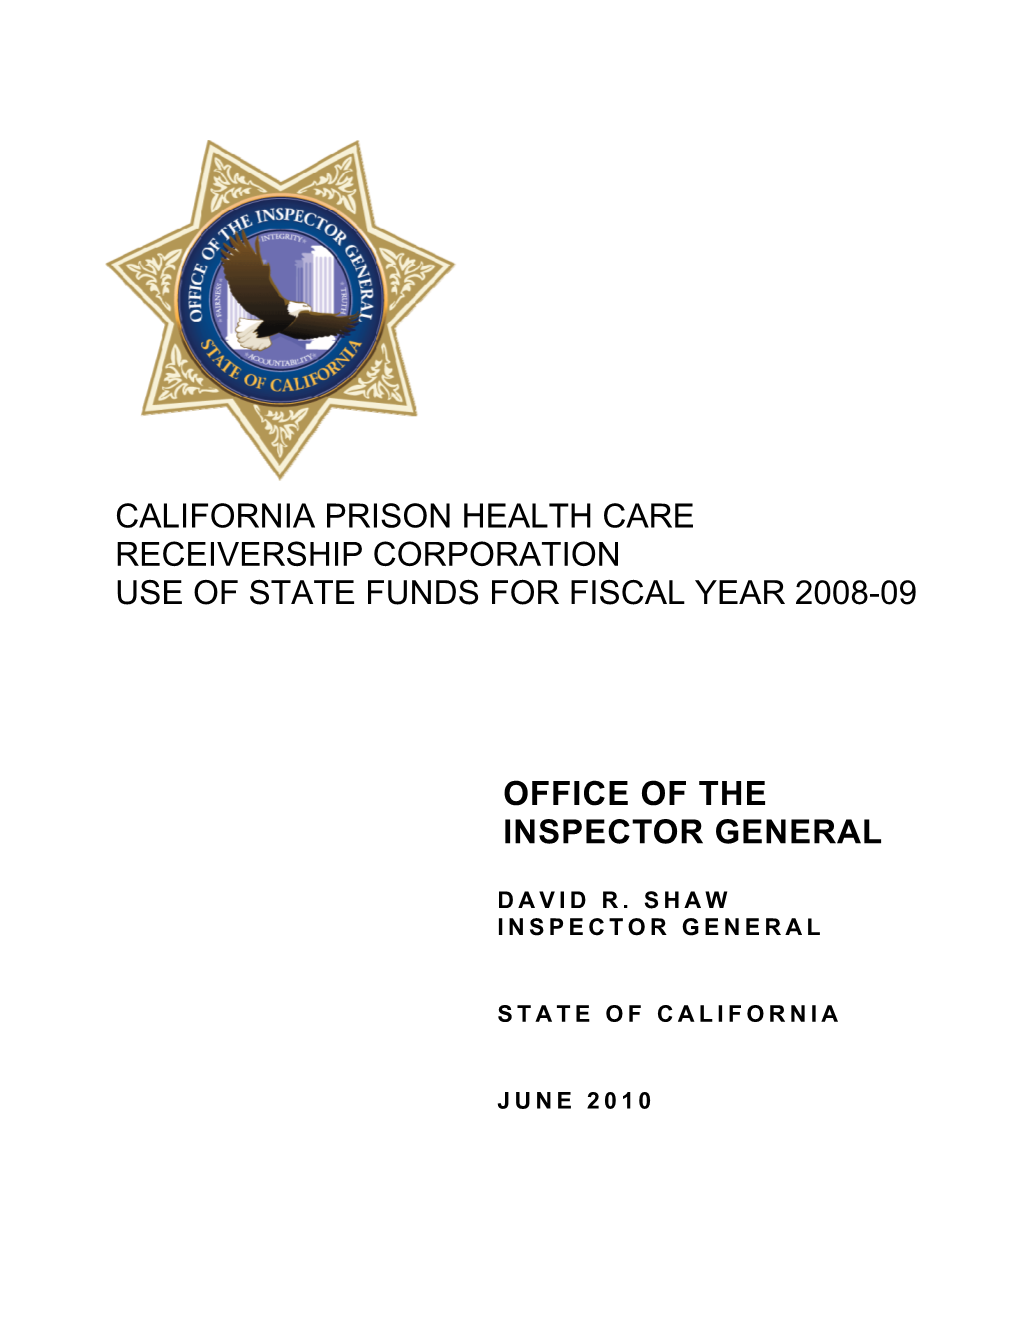 California Prison Health Care Receivership Corporation Use of State Funds for Fiscal Year 2008-09